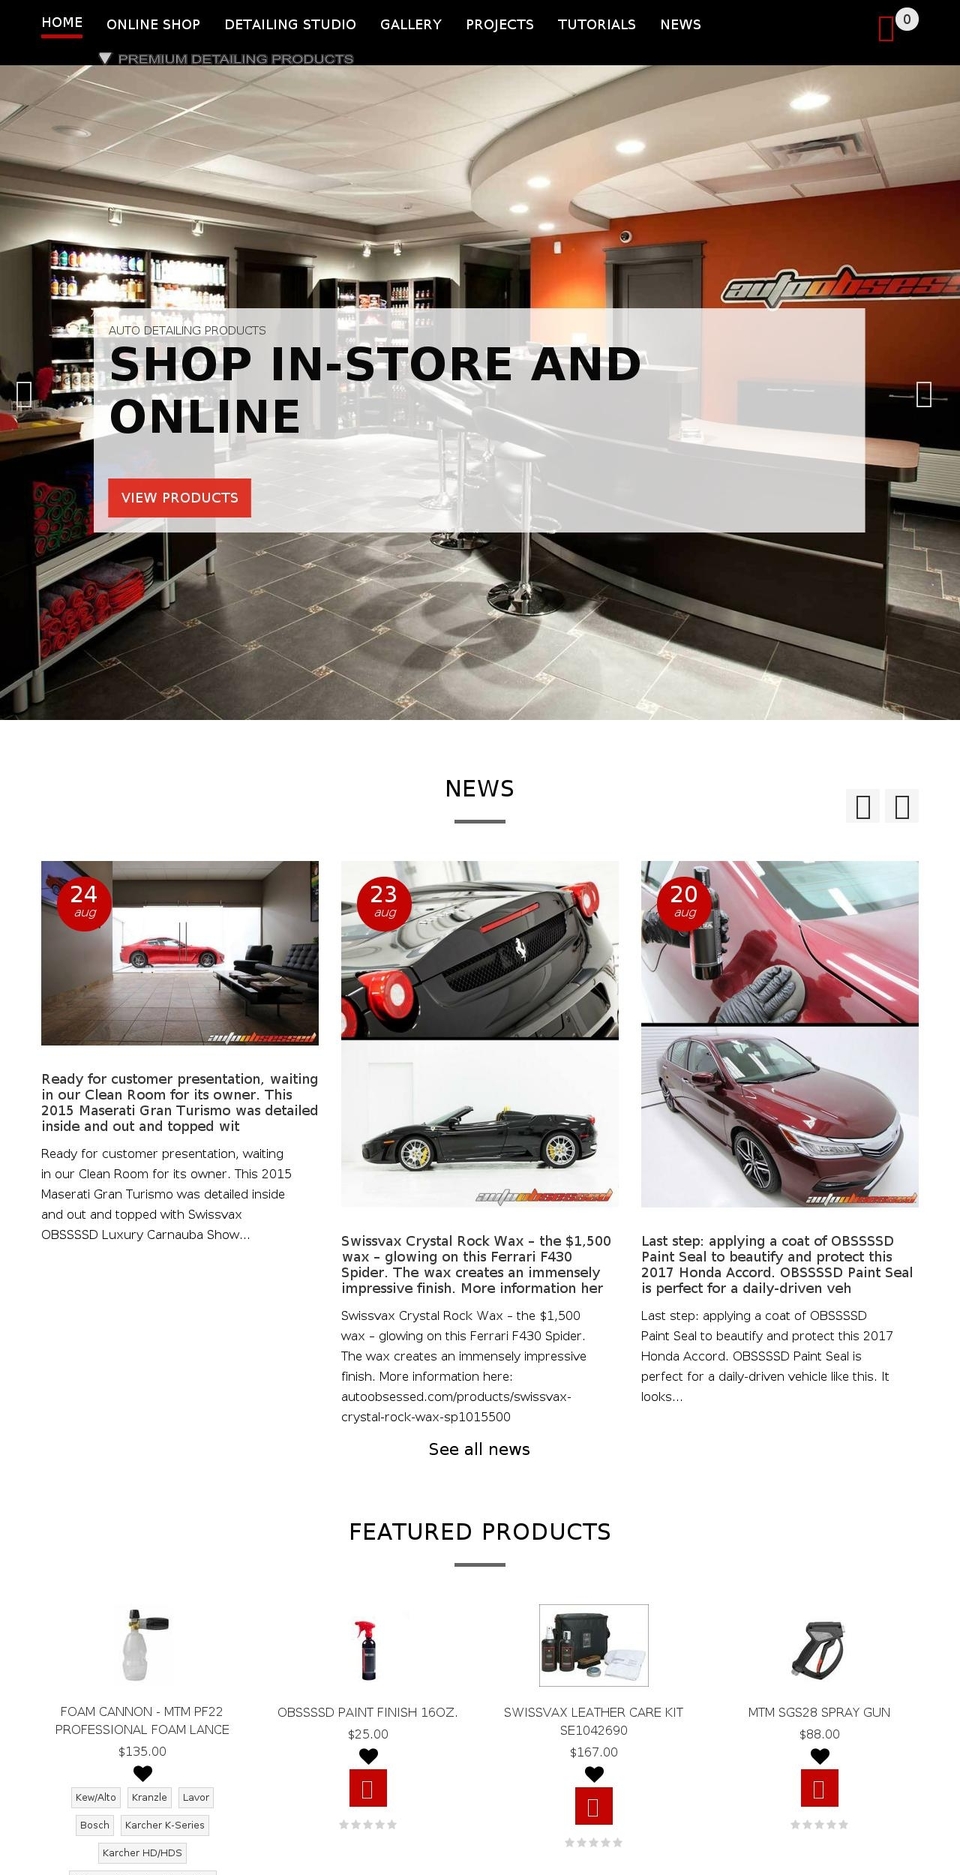 Copy of theme-export-createsimple-inc-myshopify... Shopify theme site example car-obsessed.com